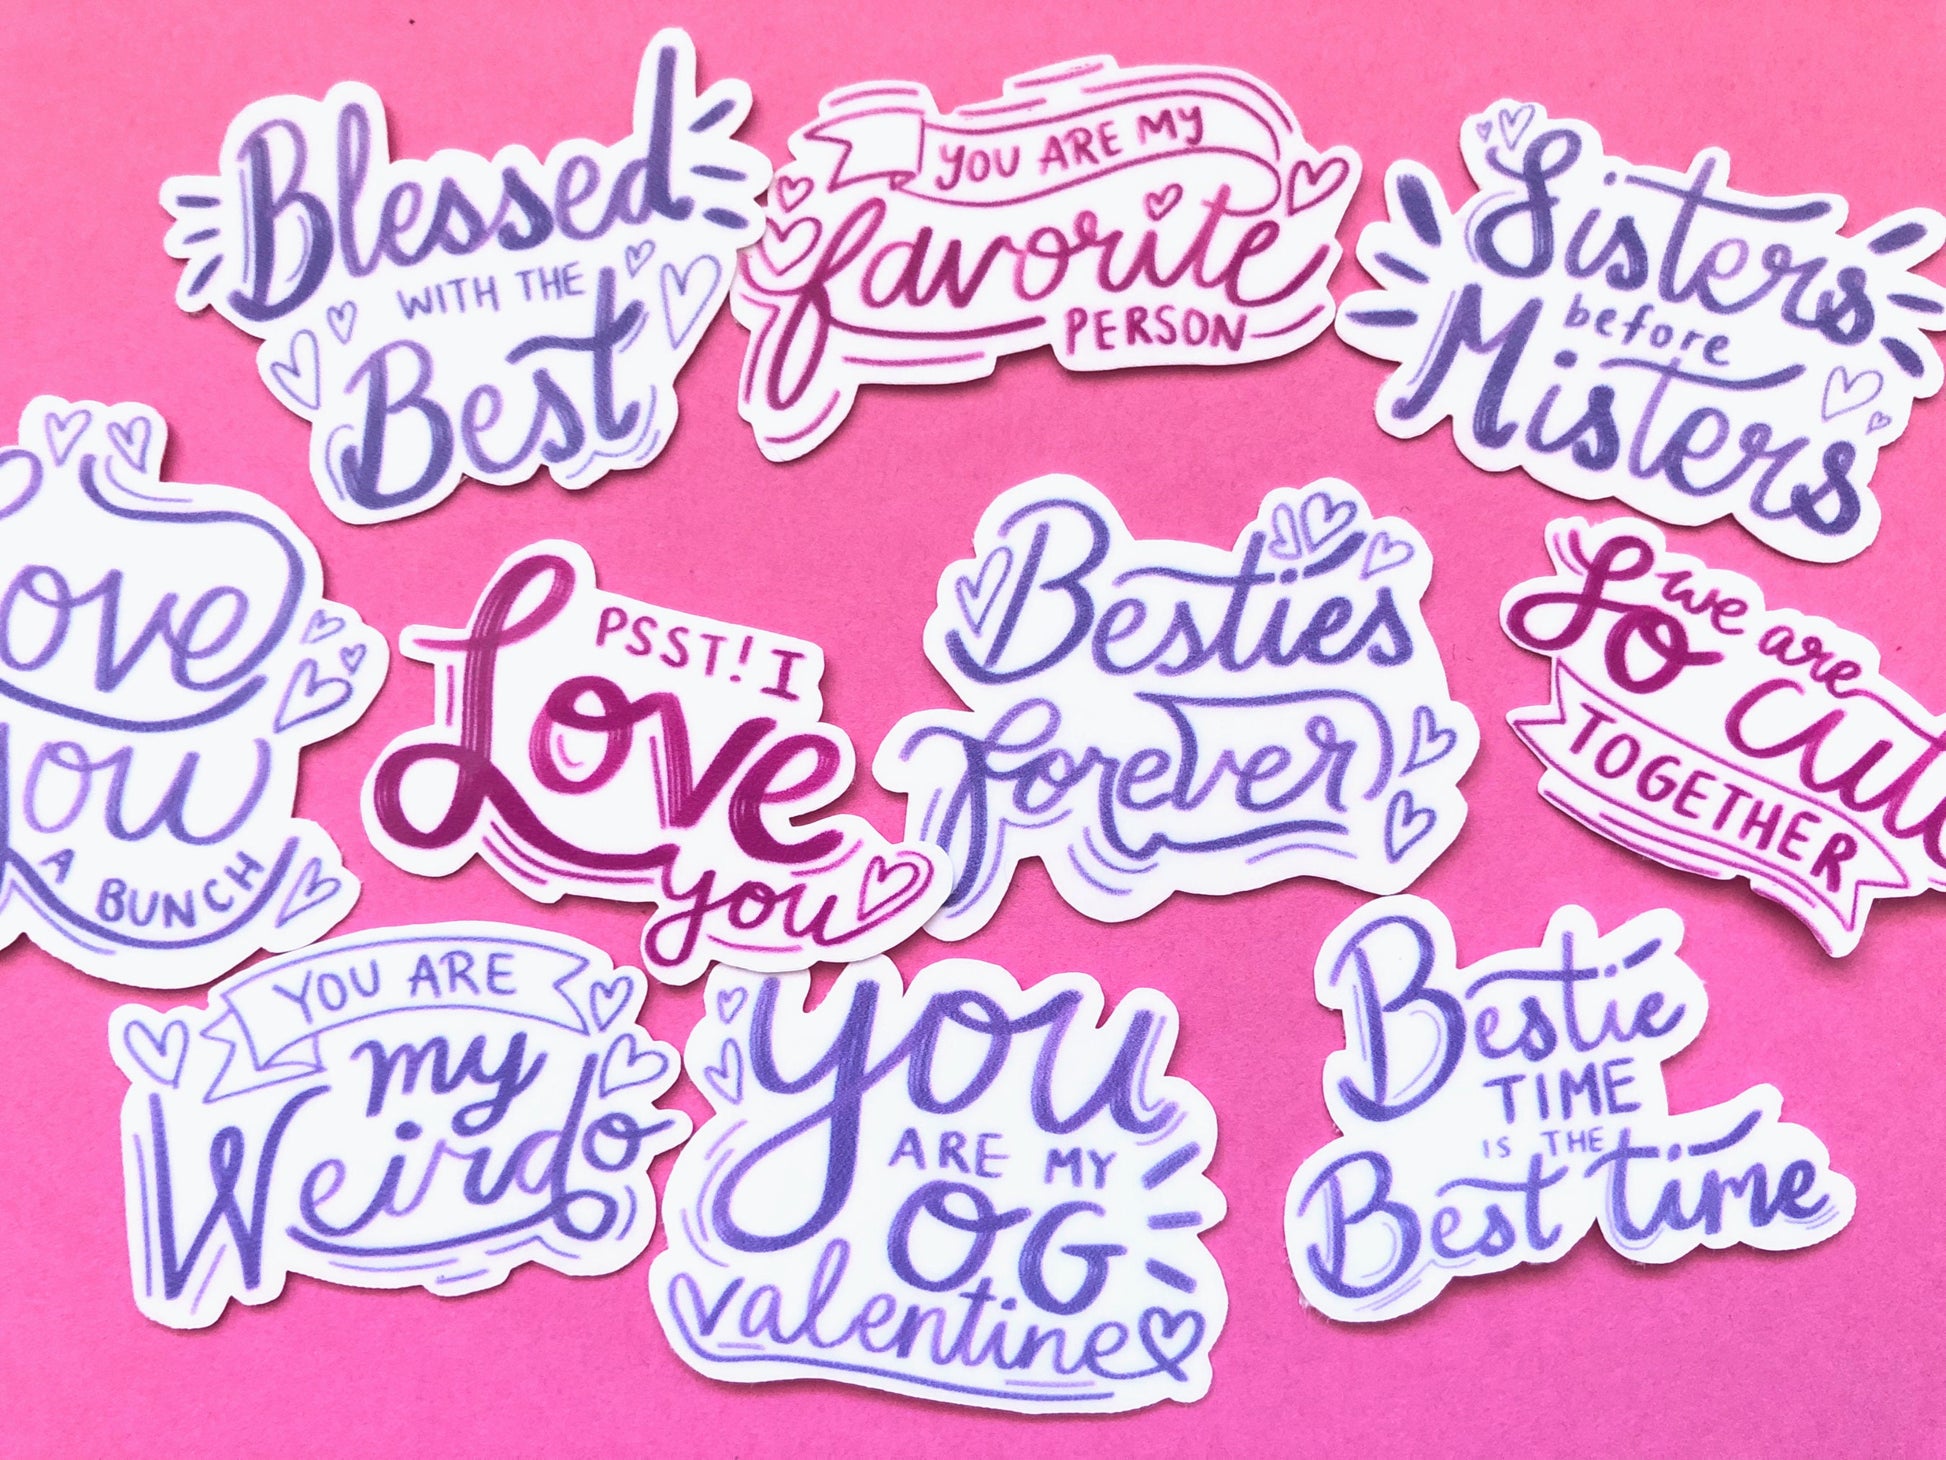 The Best Friends Sticker Pack | BFF Gifts | Bridesmaids Stickers | Bachelorette Gifts